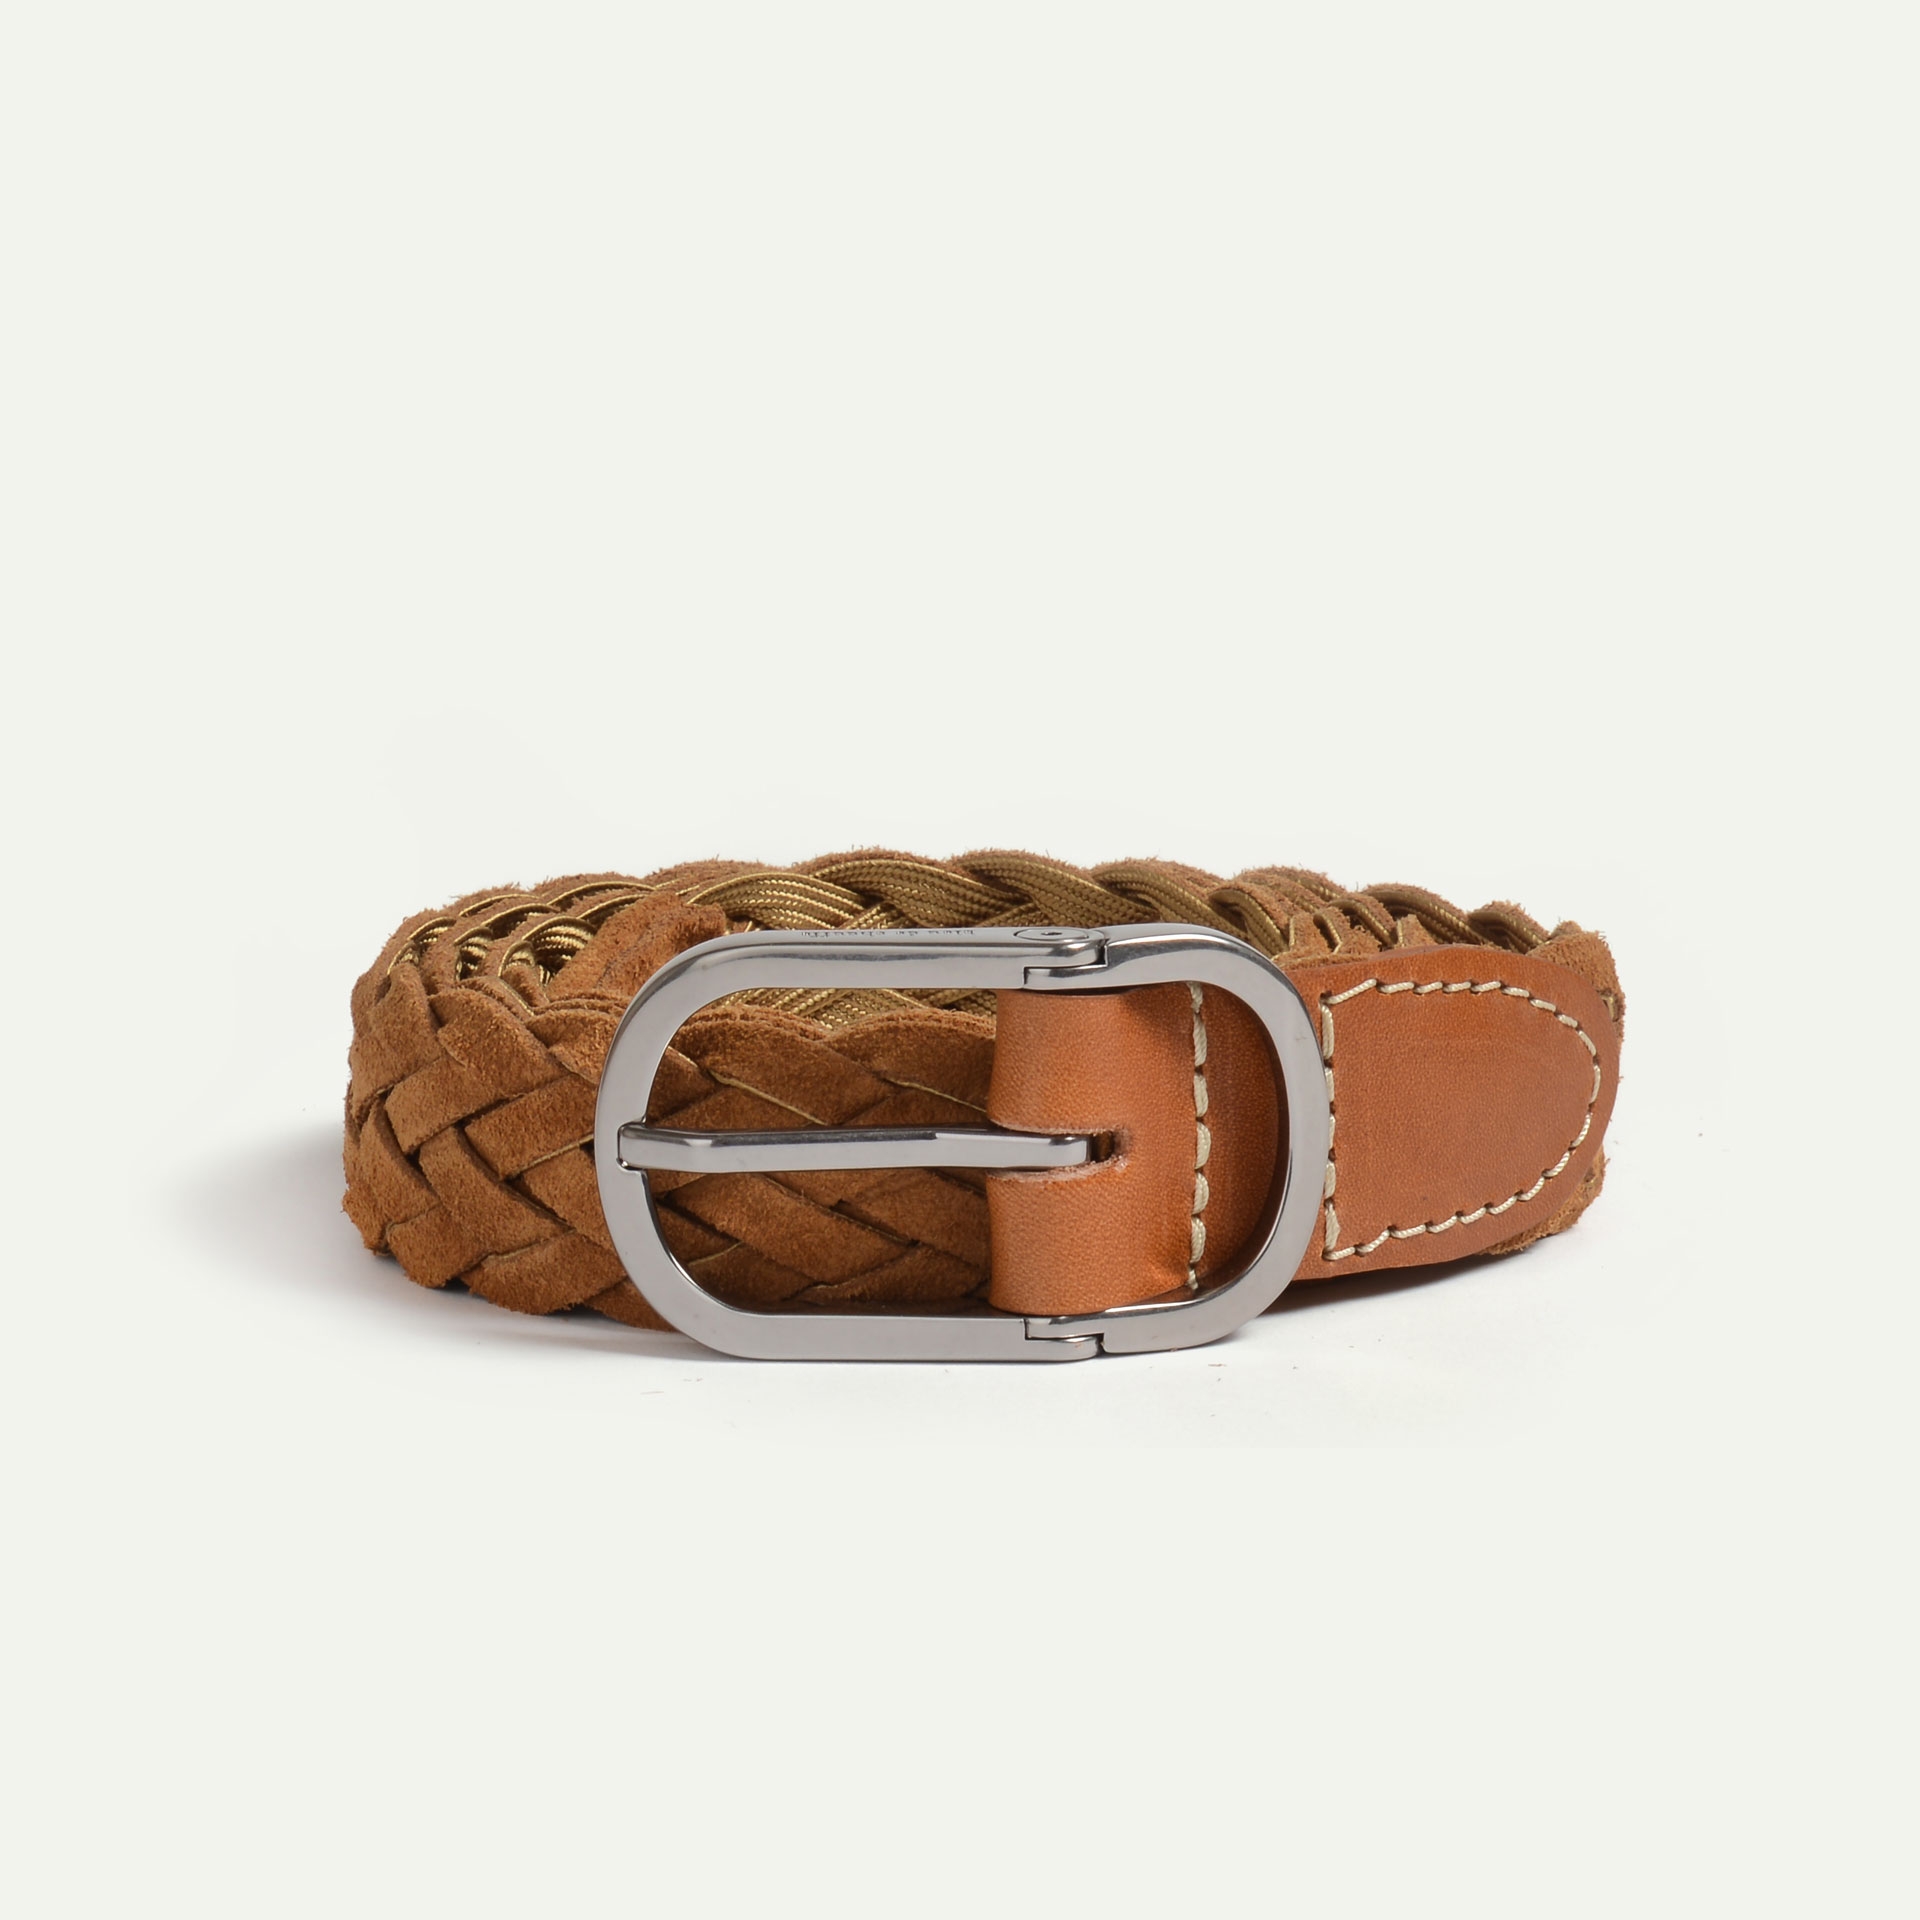 Cliquet Belt / braided leather - Honey suede (image n°1)